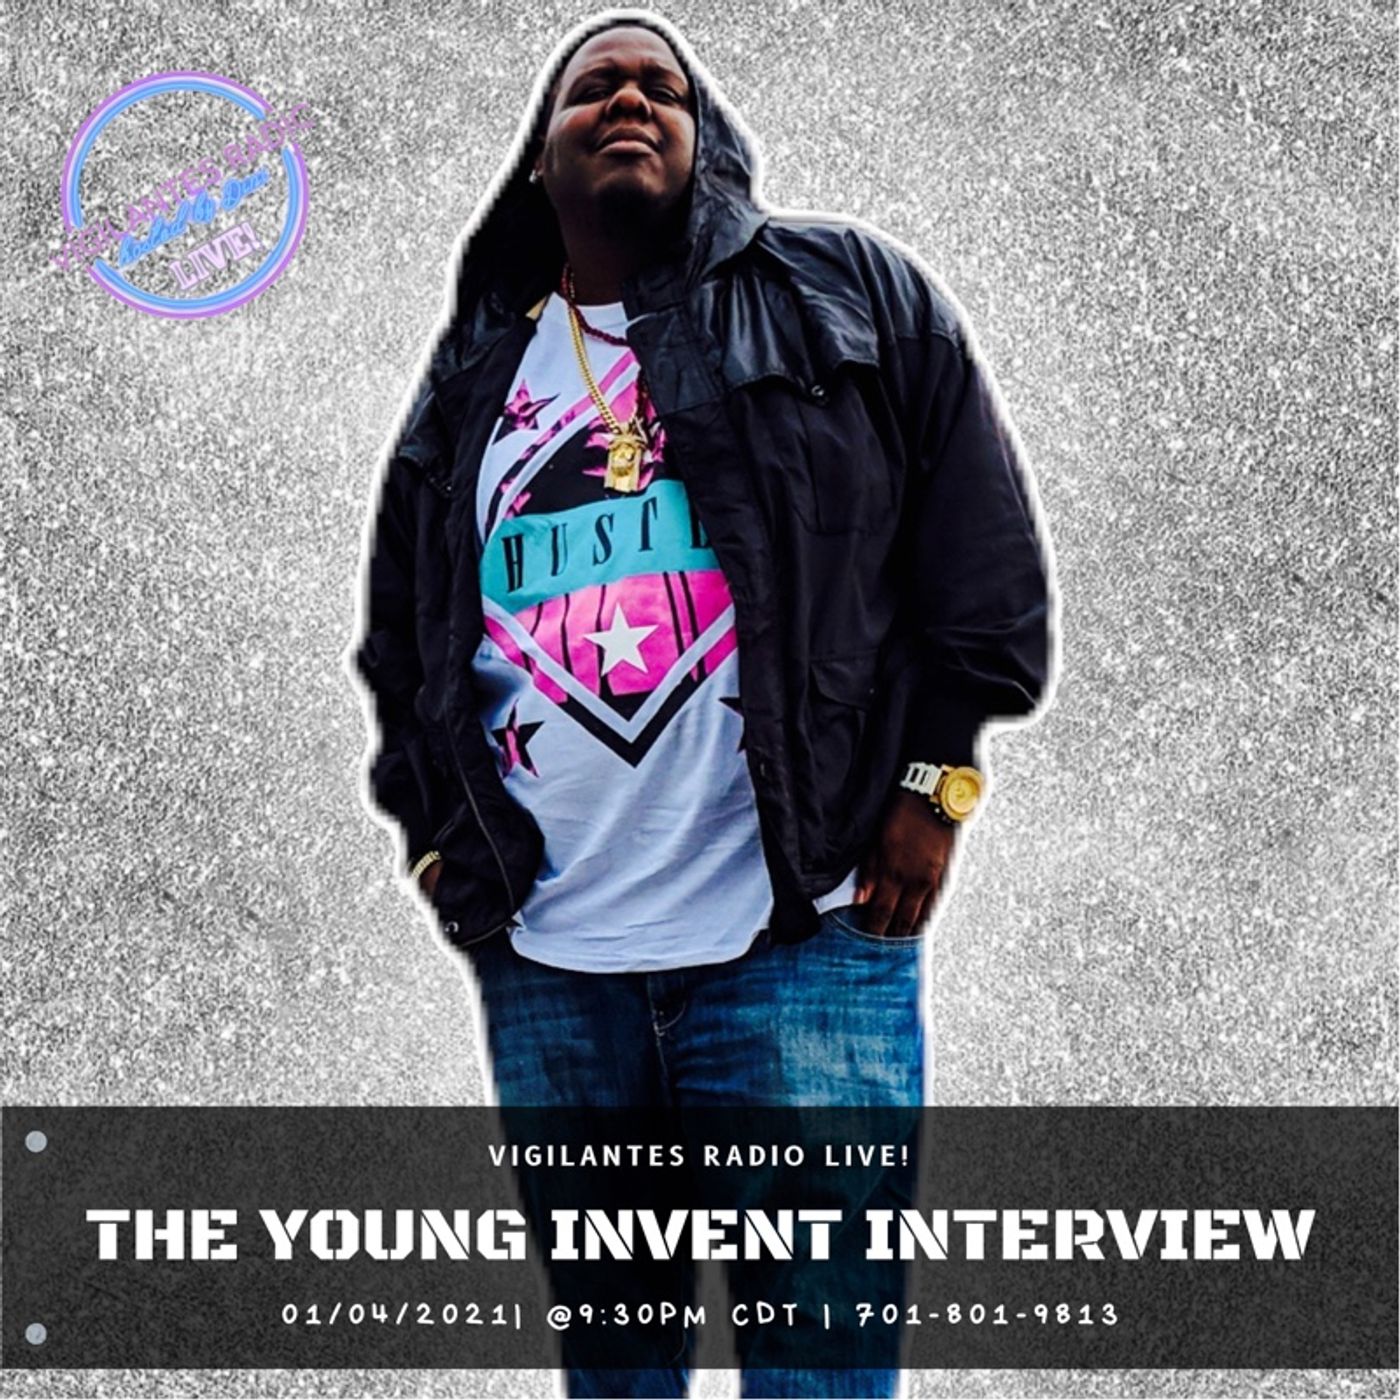 The Young Invent Interview. Image